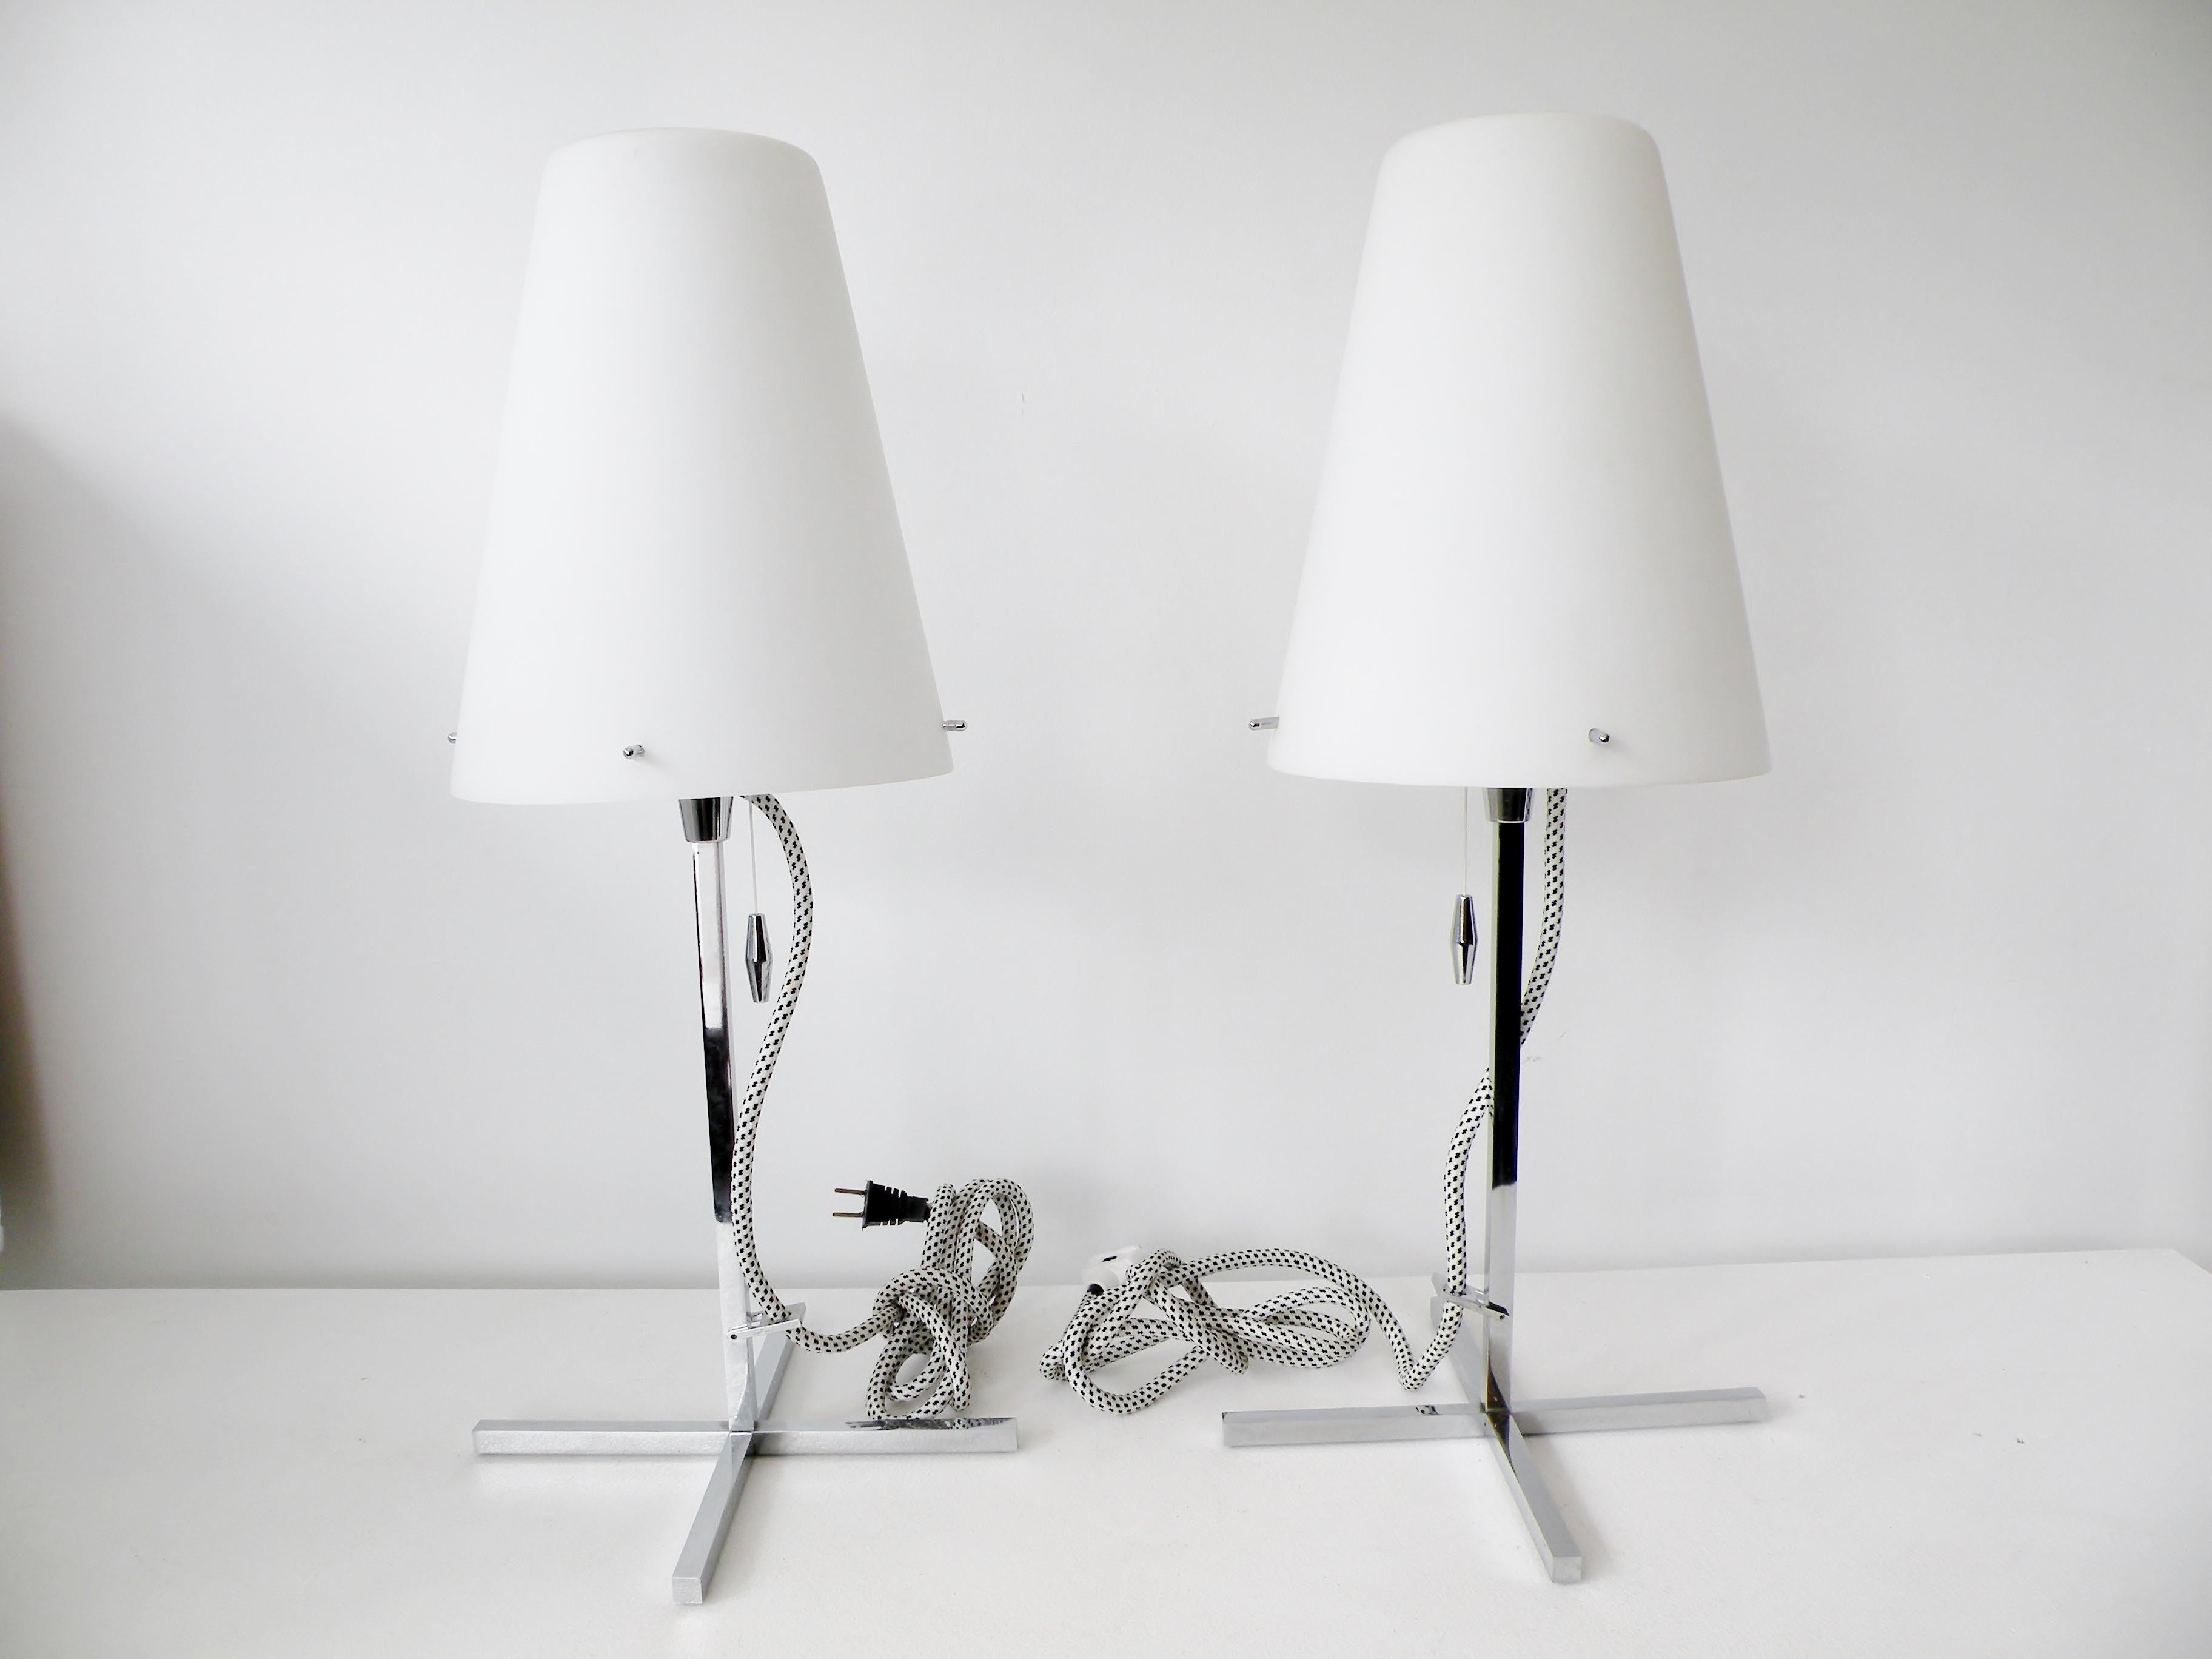 Pair of Nemo Thuban Tavolo table lamps designed by Hannes Wettstein. Bodies of polished chrome steel with clean Italian modernist lines, satin white blown glass diffuser shades, and white/ black fabric covered cords with in line dimmers.